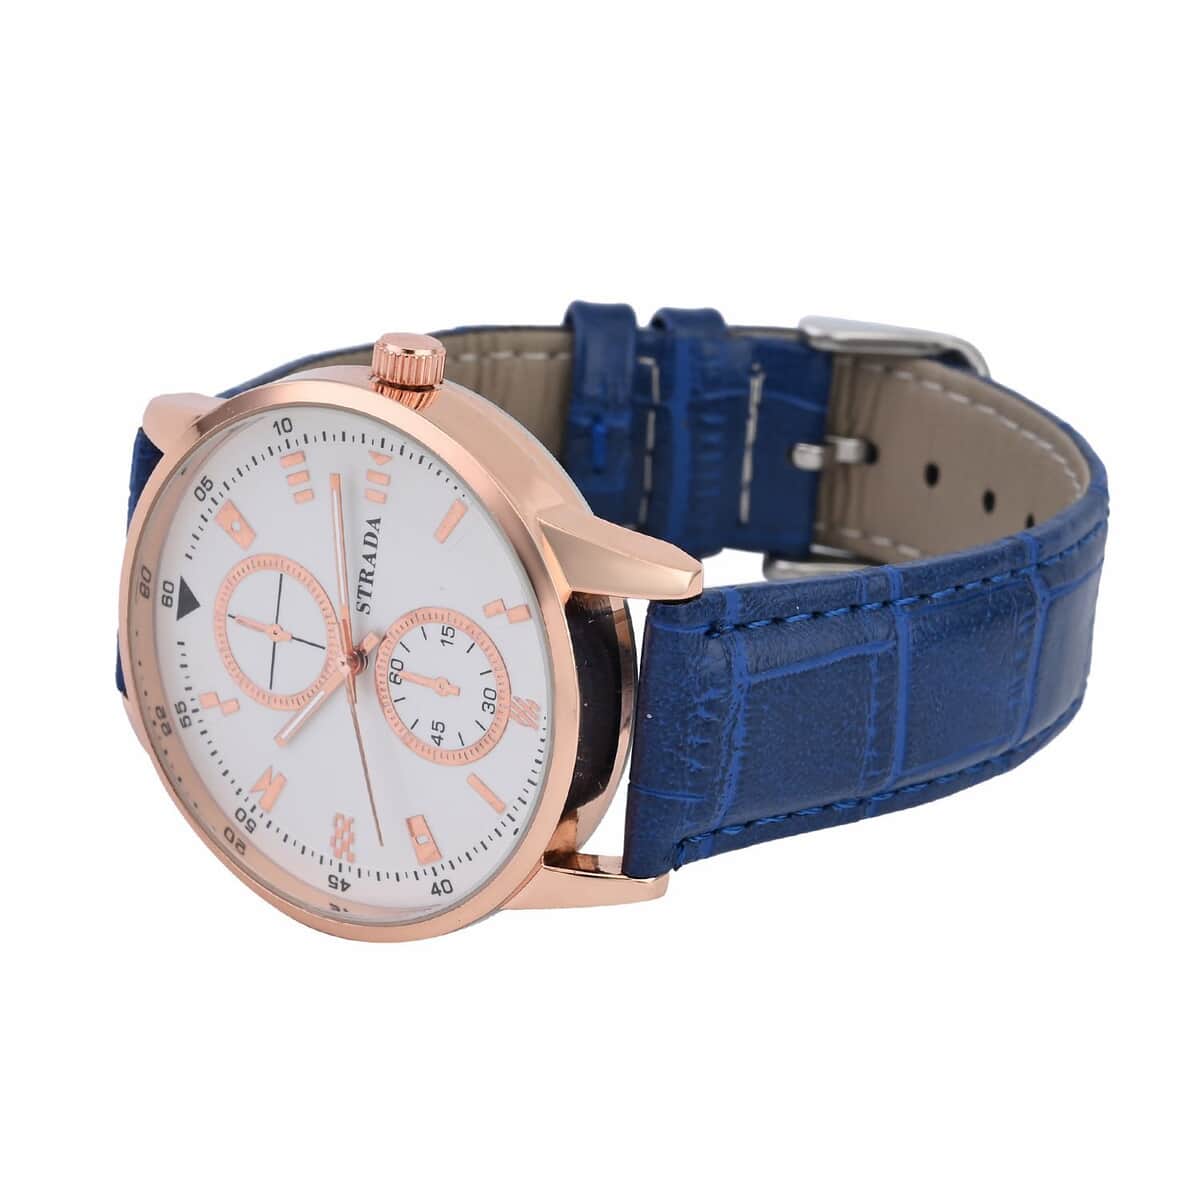 Strada Japanese Movement Watch in Rosetone with Blue Faux Leather Strap (40.65mm) (5.75-7.75 Inches) image number 4